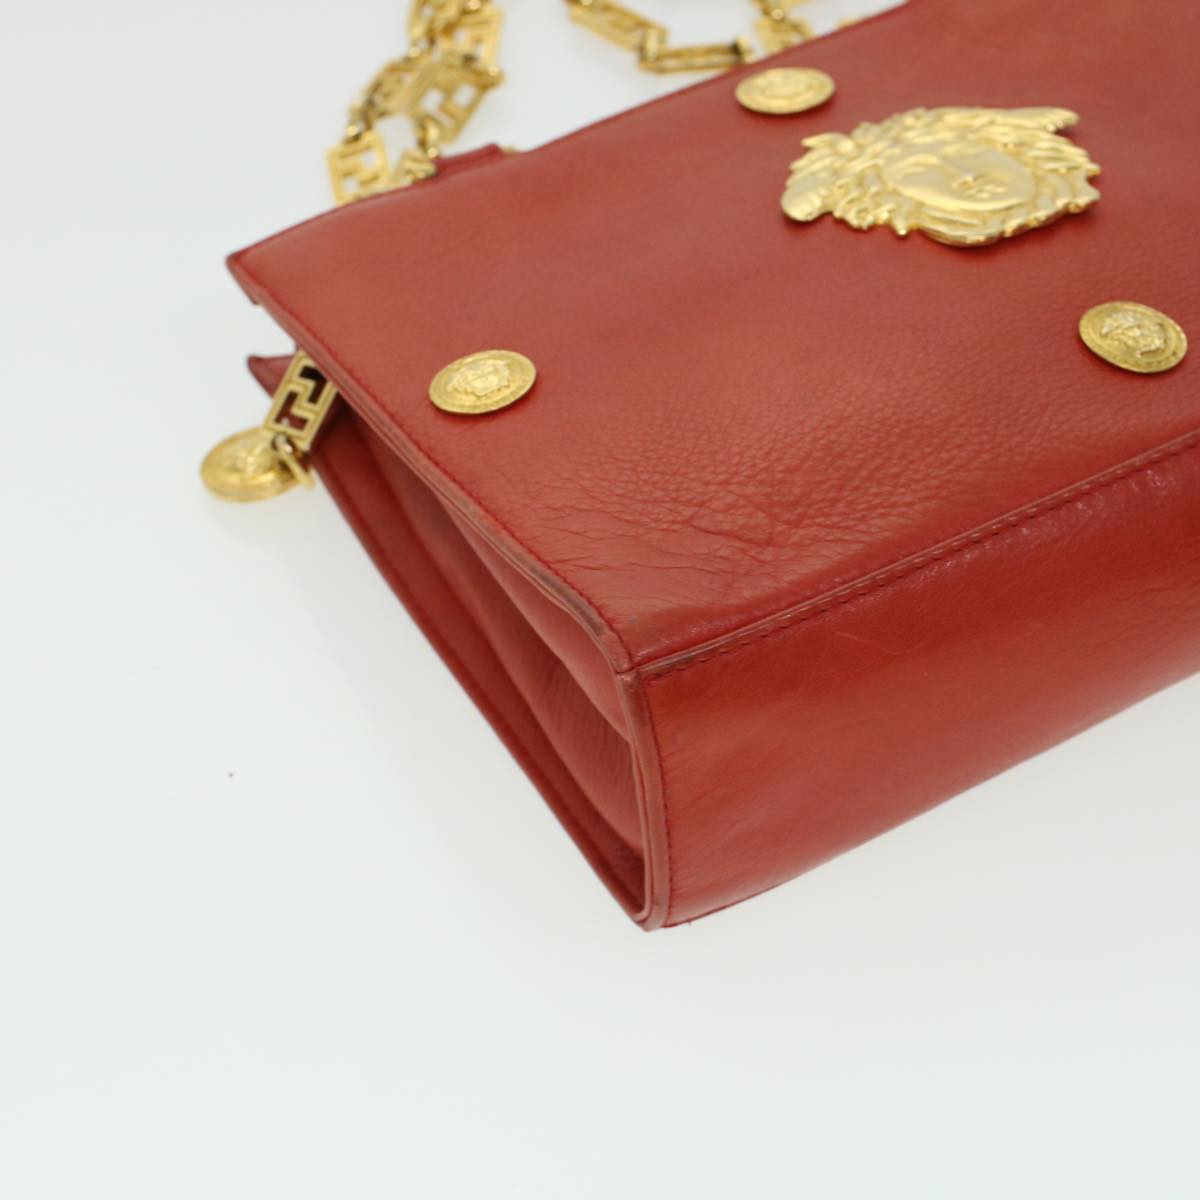 VERSACE Chain Shoulder Bag Leather Red Auth 42450